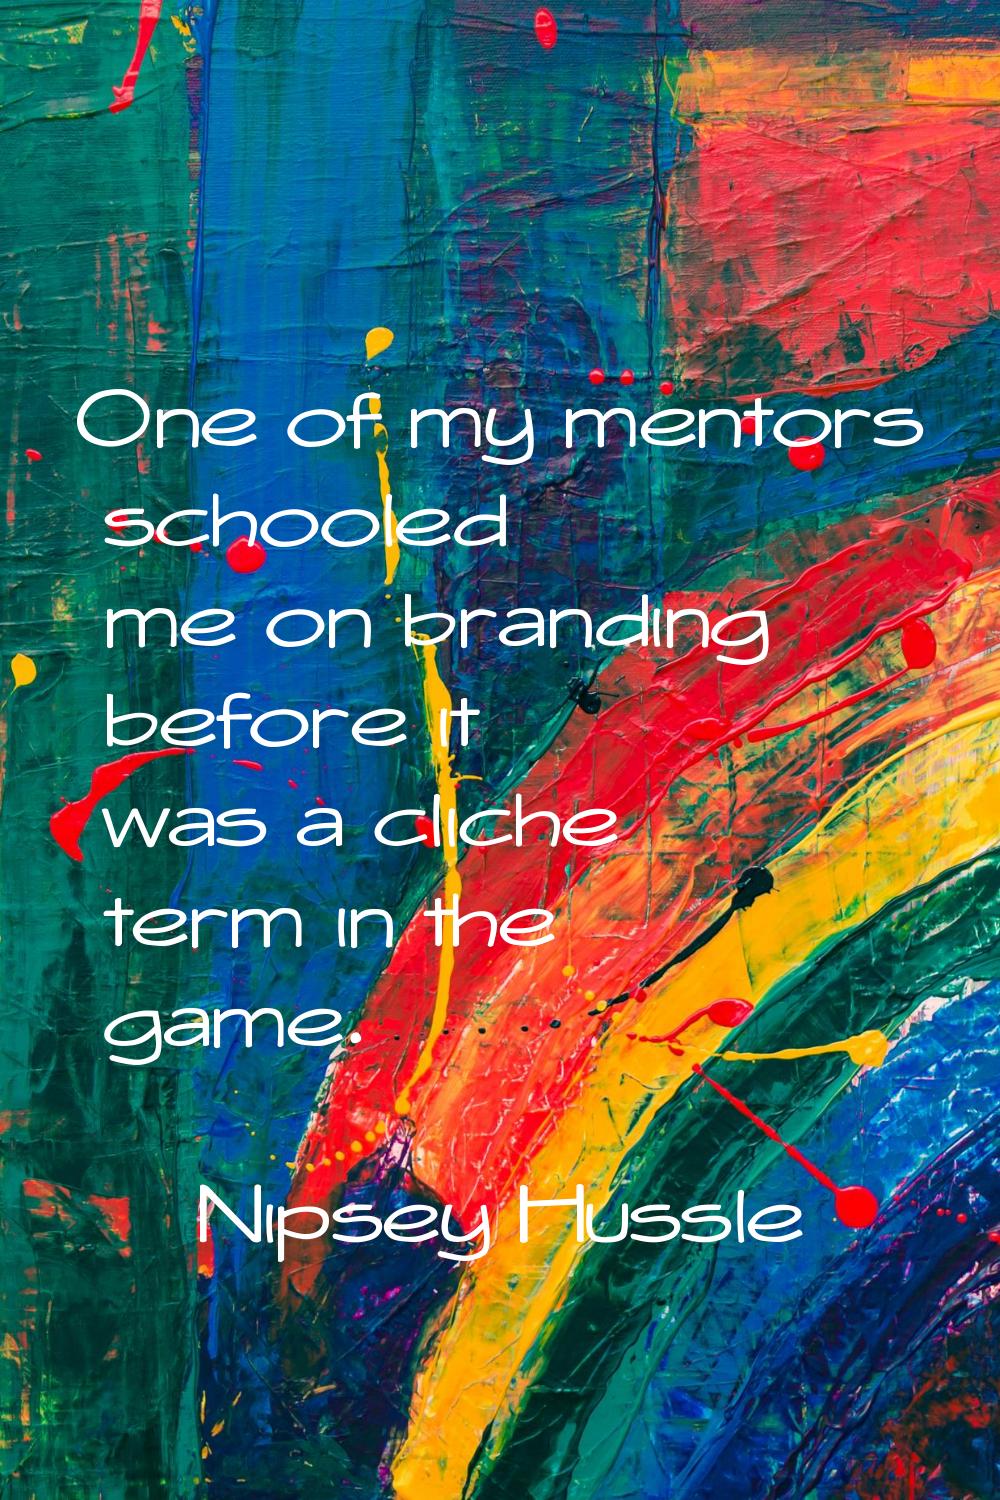 One of my mentors schooled me on branding before it was a cliche term in the game.